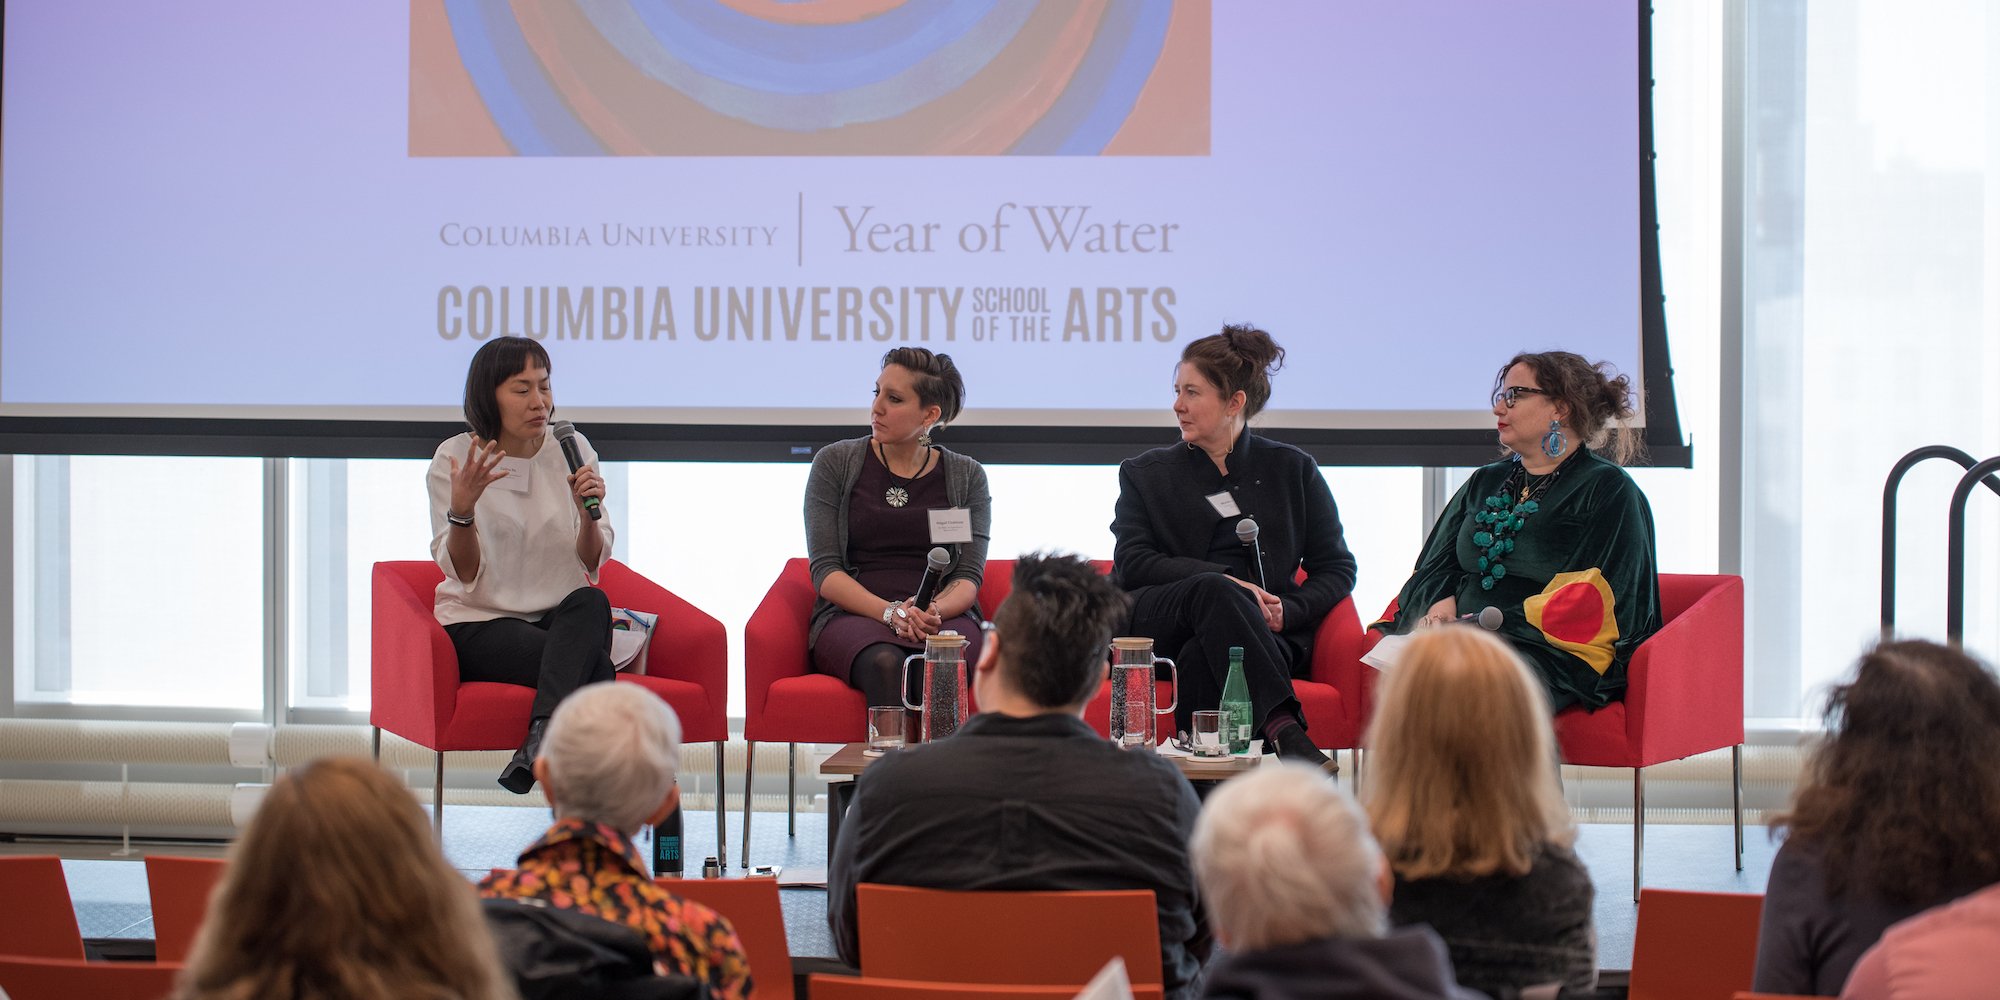  (Left to right): Celina Su, Matthea Harvey, Dorothea Lasky, and Abigail Chabitnoy discussing Poetry, Water, Place, Space, and Time